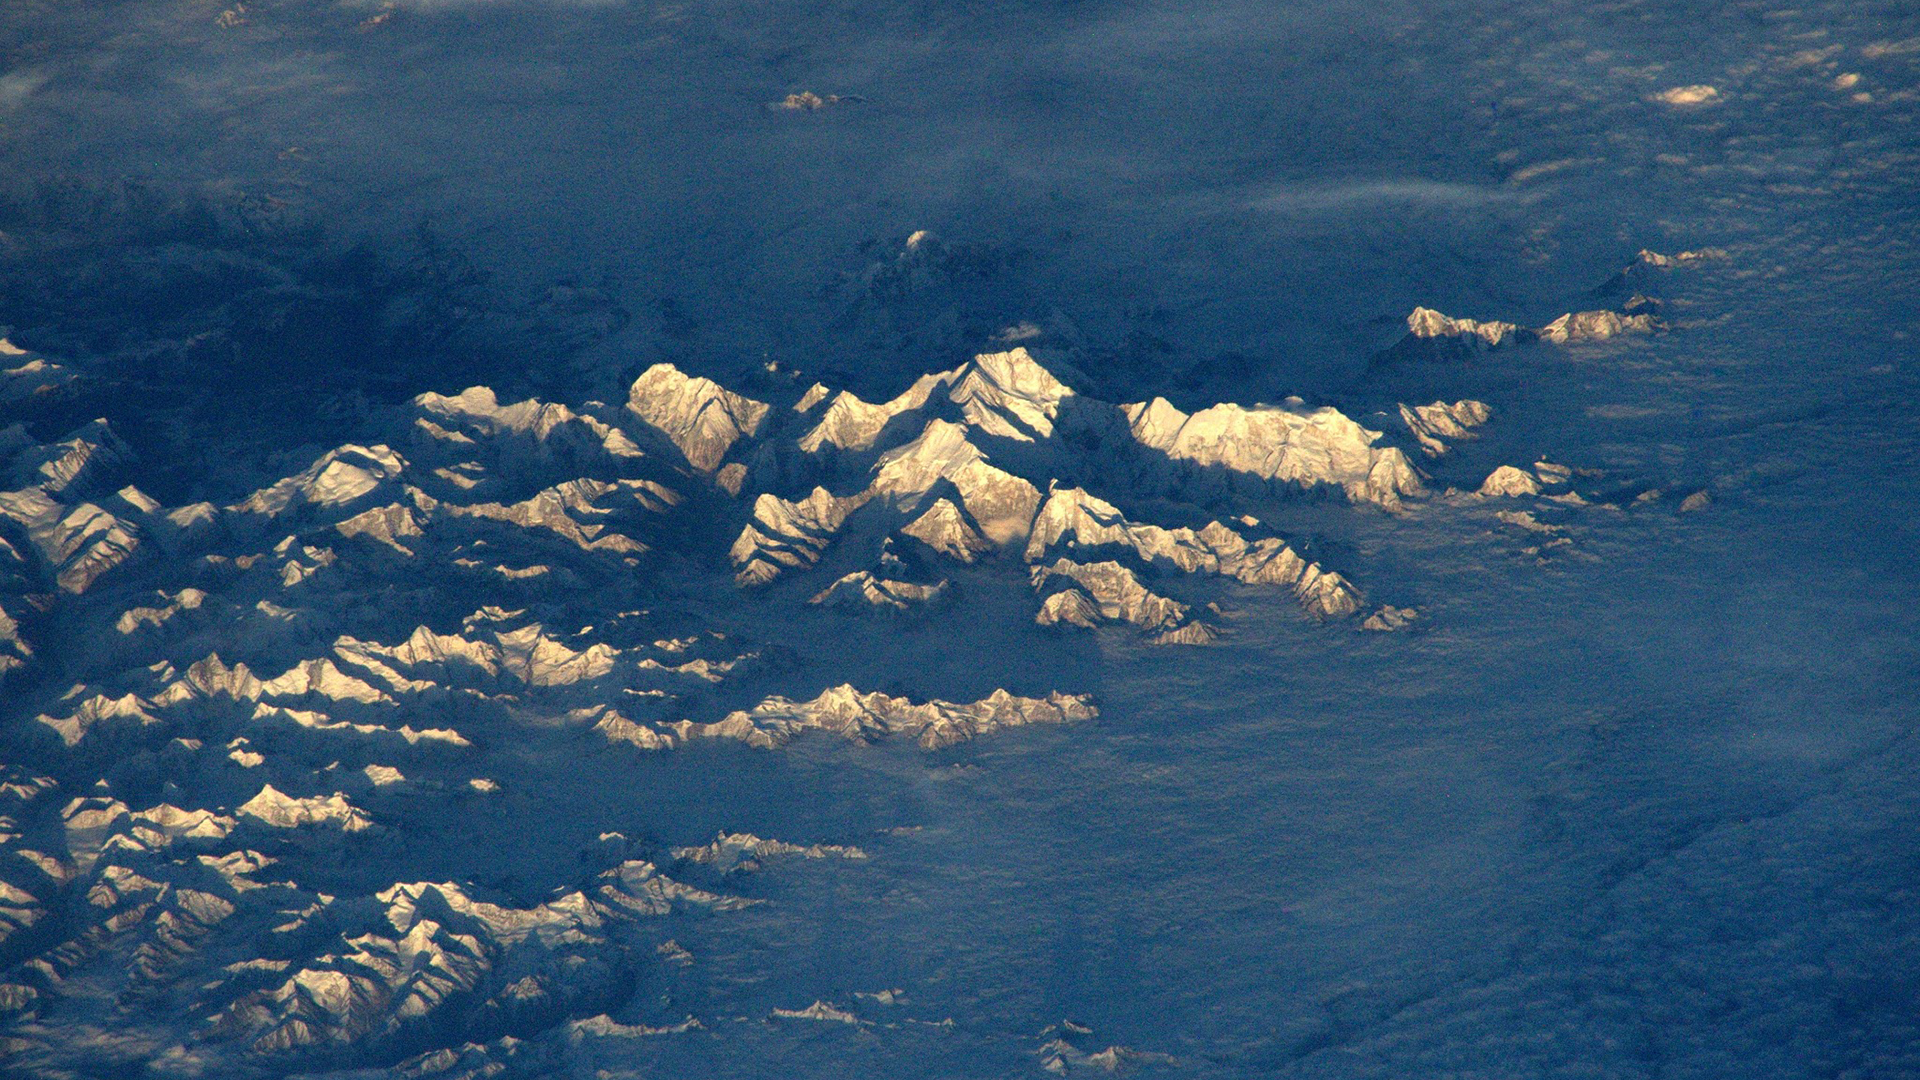 Earth Clouds Nature Snow Mountains Mount Everest Aerial View Terraces 1920x1080